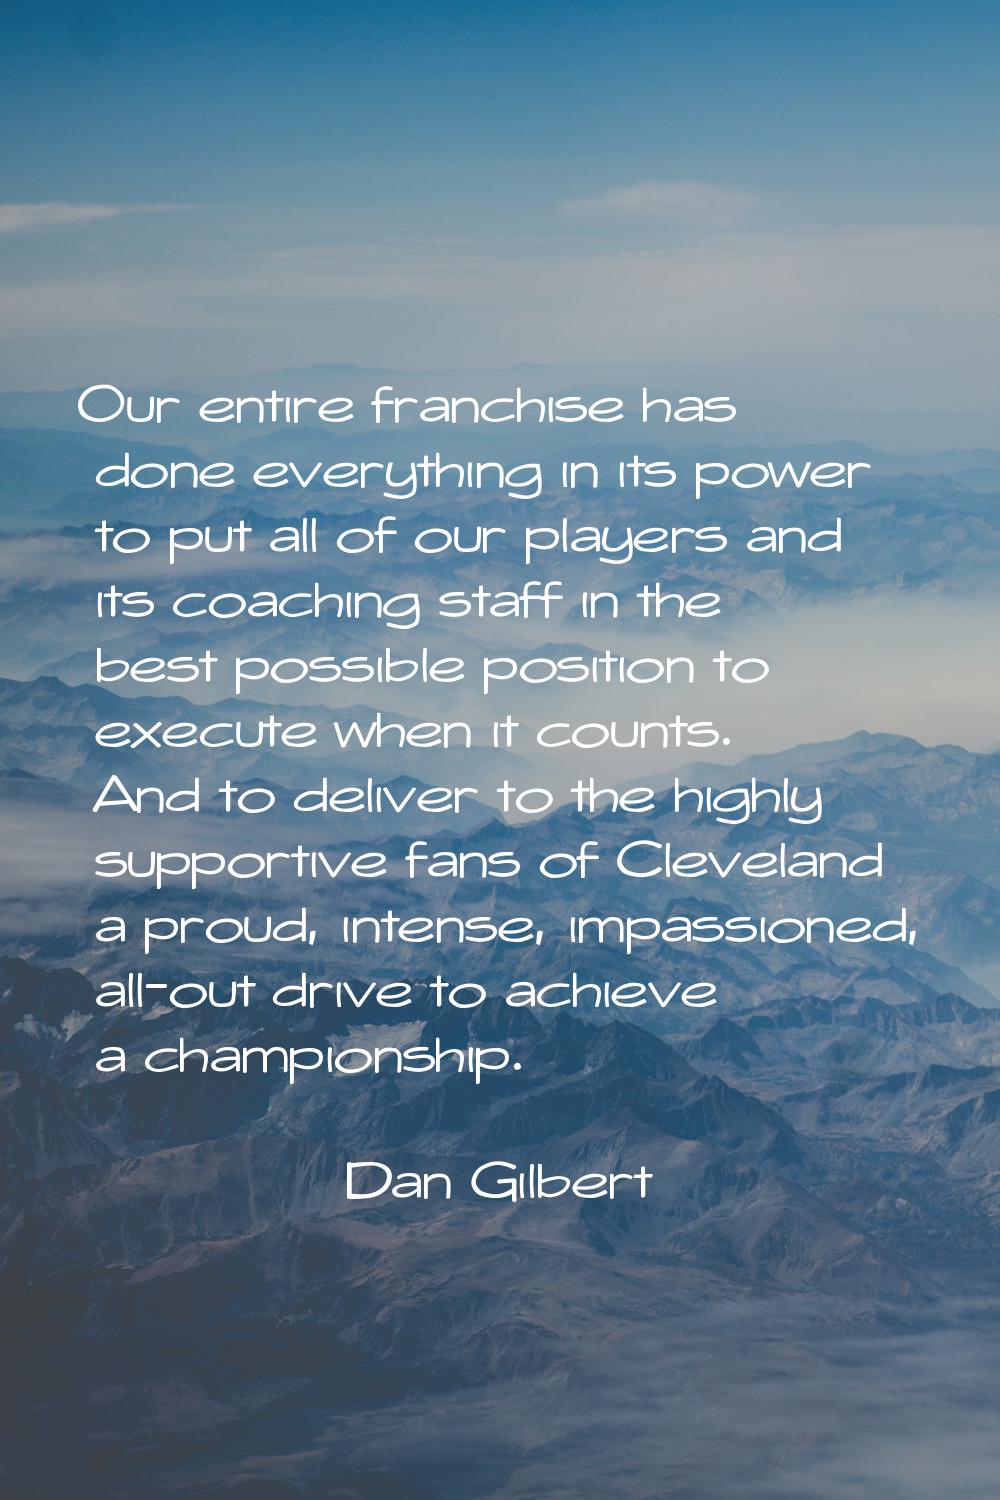 Our entire franchise has done everything in its power to put all of our players and its coaching st